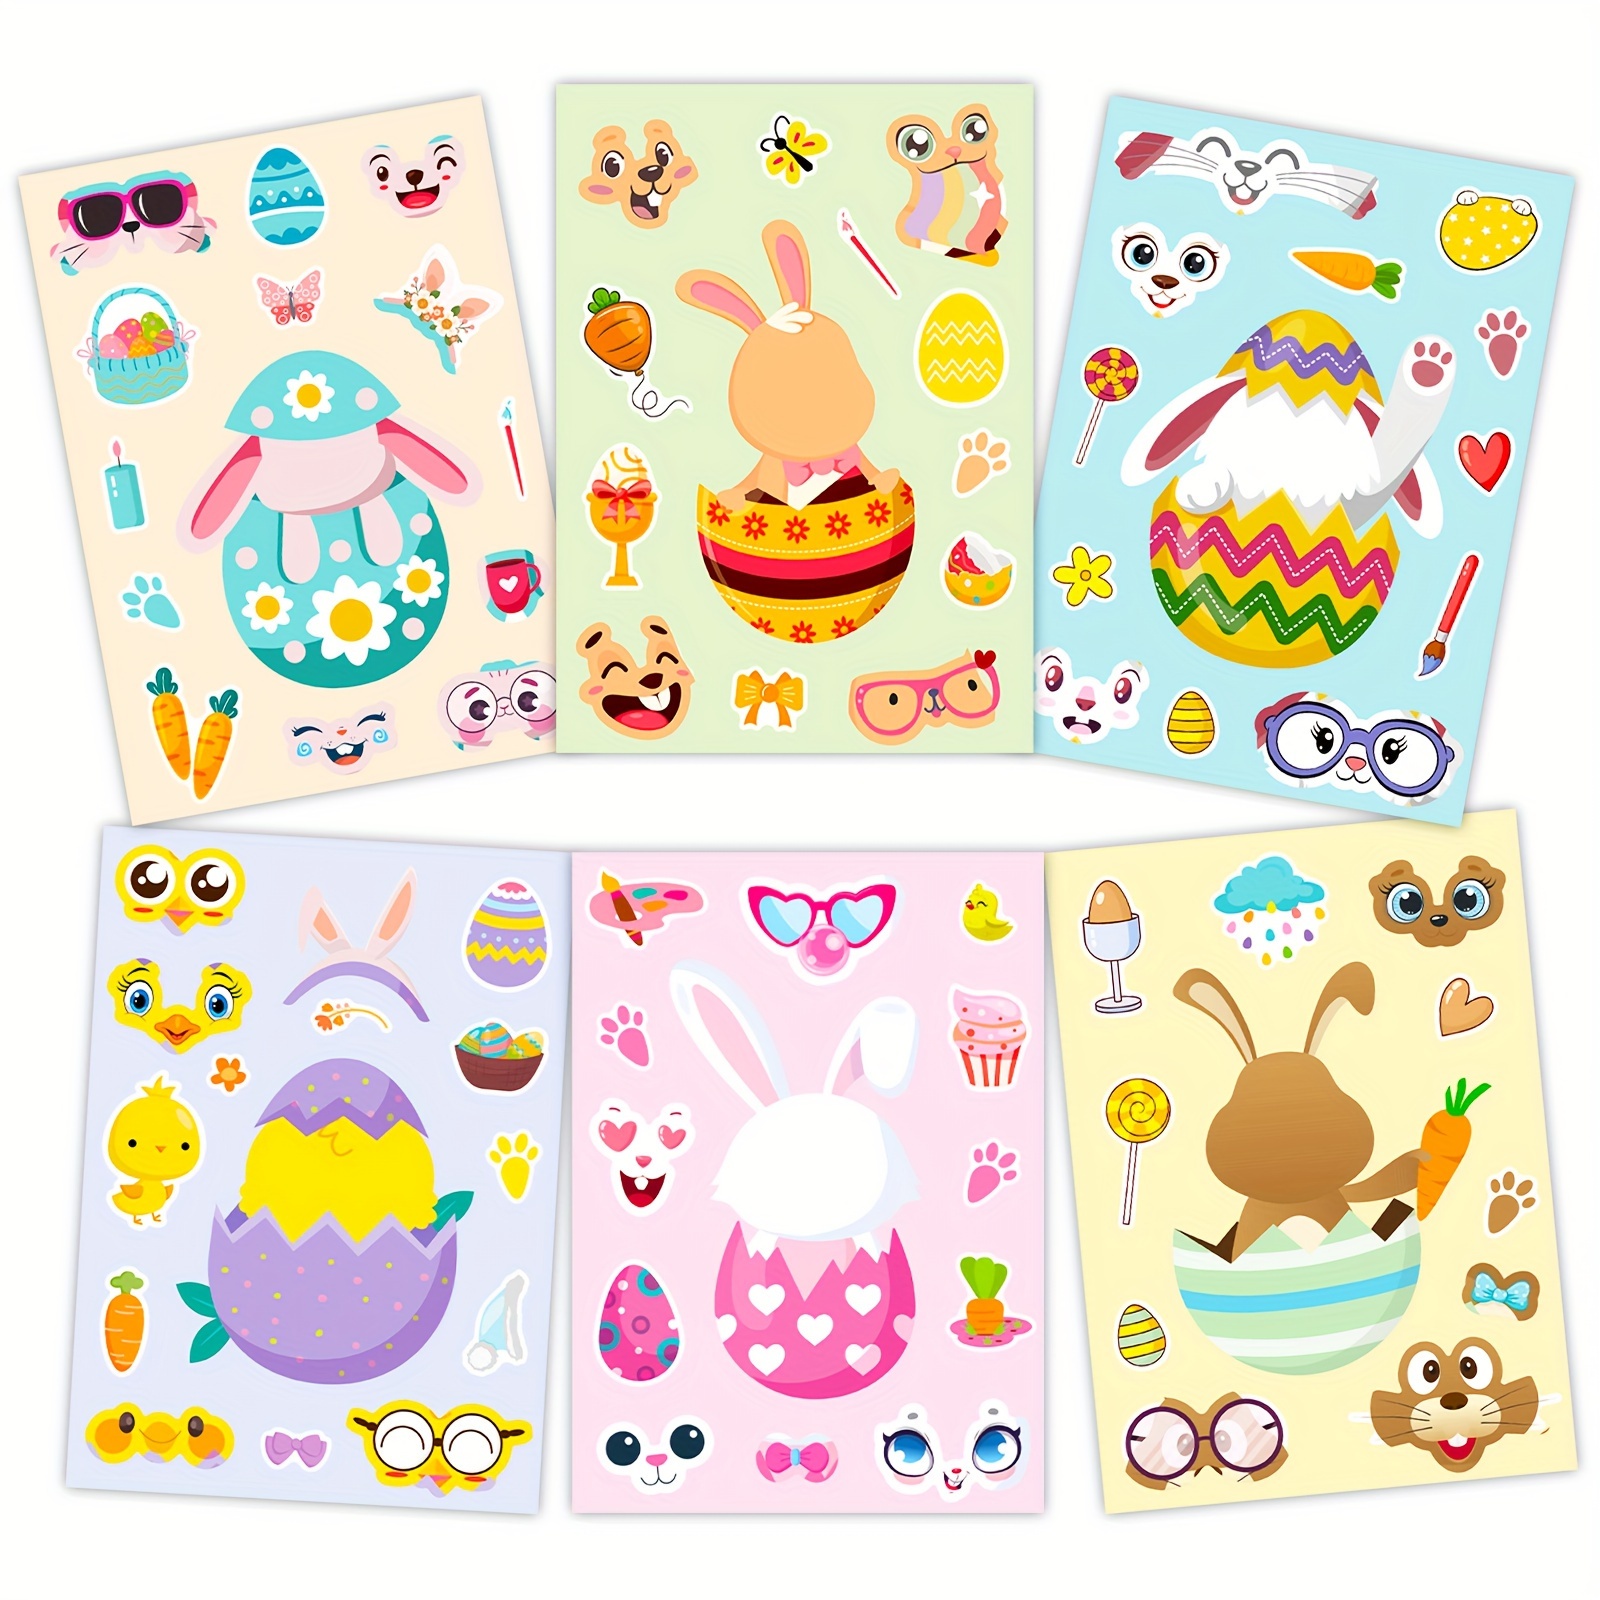 6 Sheets Cute Rabbit Egg Stickers For Party Favors Activities, DIY Make A Face Stickers, Cartoon Easter Stickers